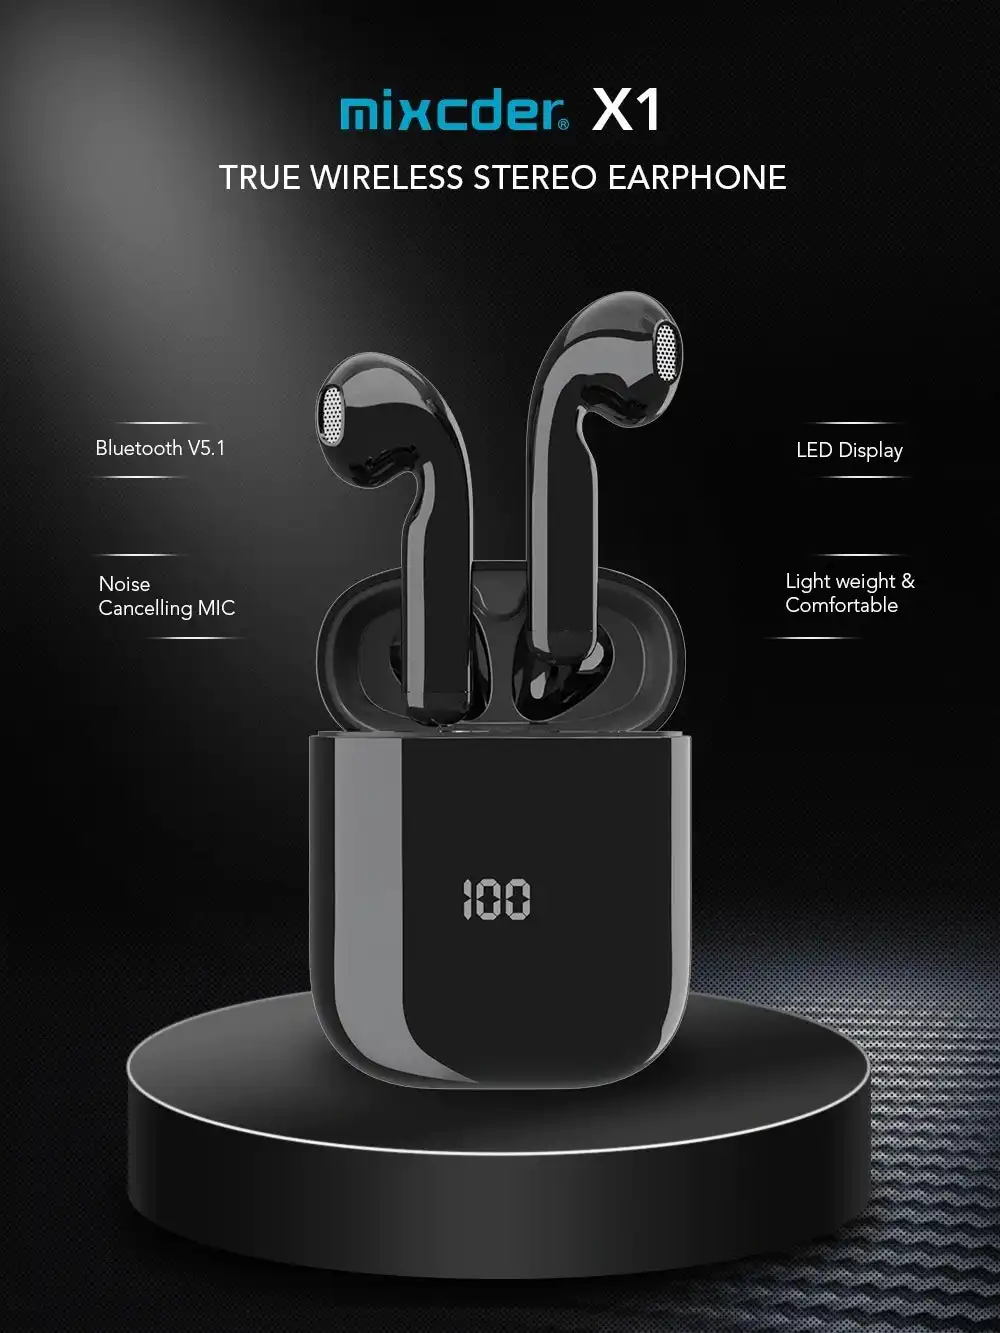 Mixcder X1 TWS Bluetooth Wireless Earphones with 4 Microphone BT5.1 Noise Cancellation Earbuds Sports Earphone 24Hrs Playtim